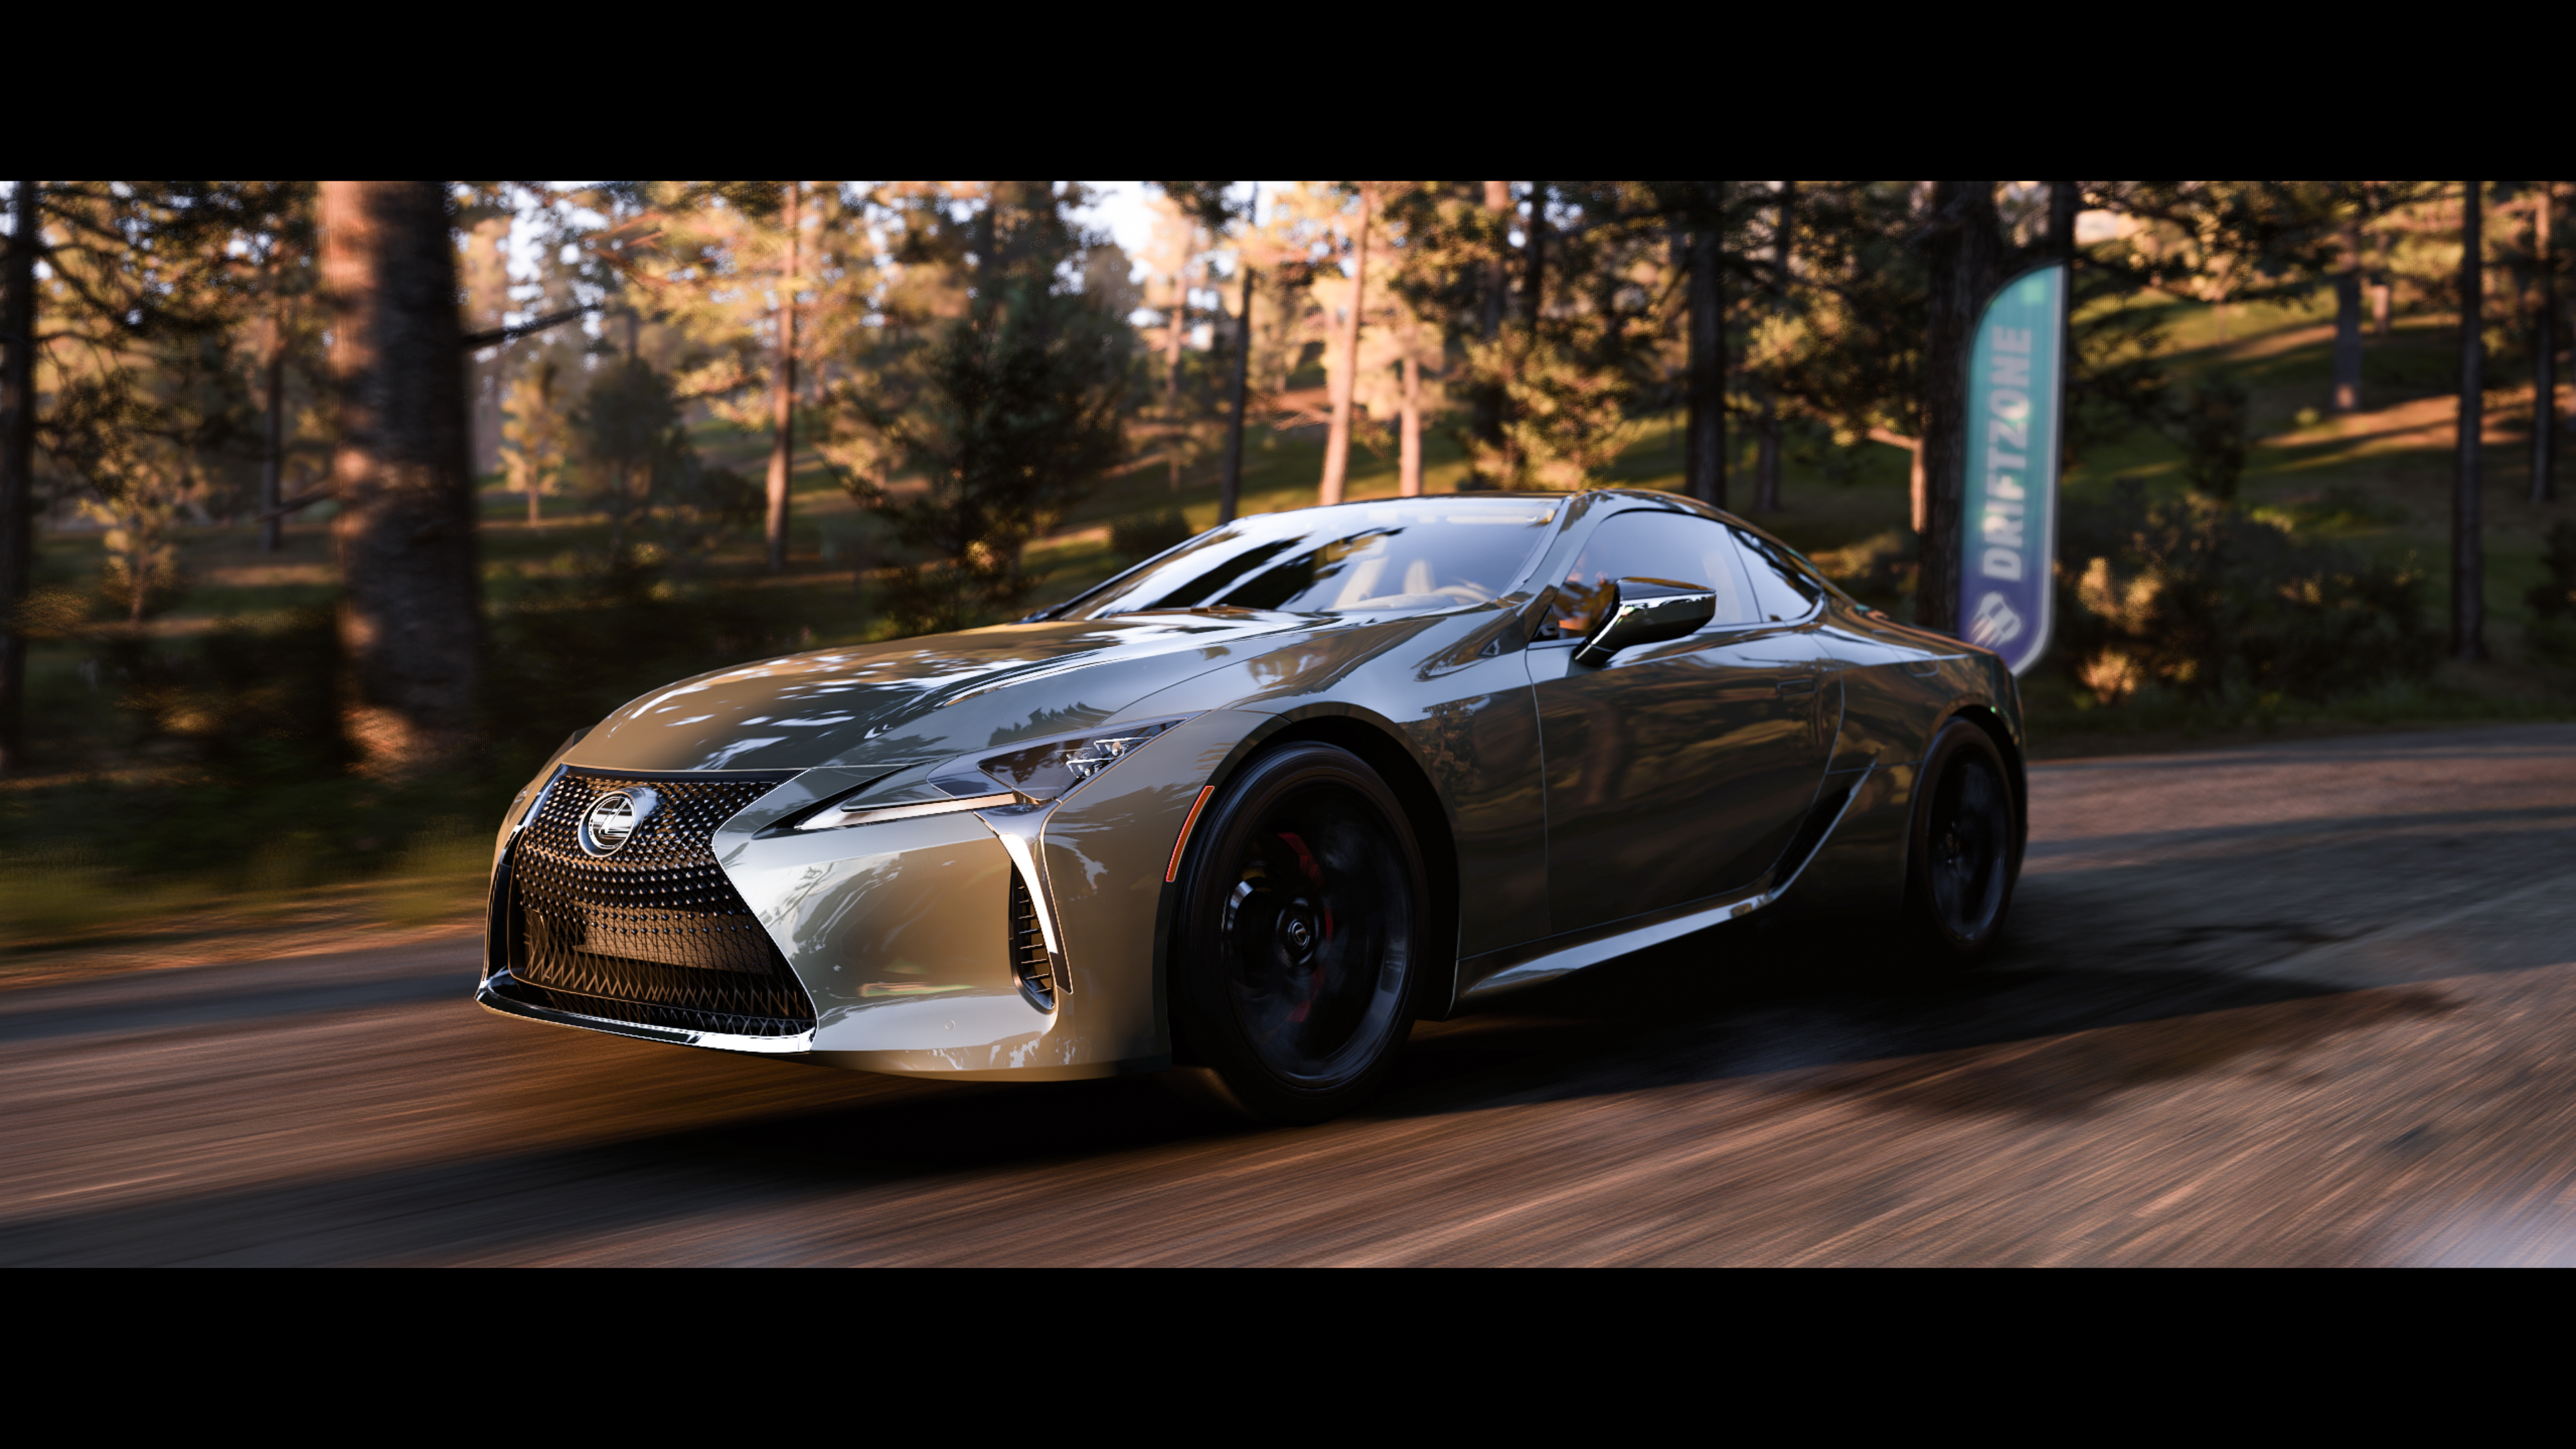 General 3600x2025 Forza Forza Horizon 5 Lexus Lexus LC-500 Japanese cars video games PlaygroundGames vehicle sunlight trees road frontal view blurred video game art CGI car